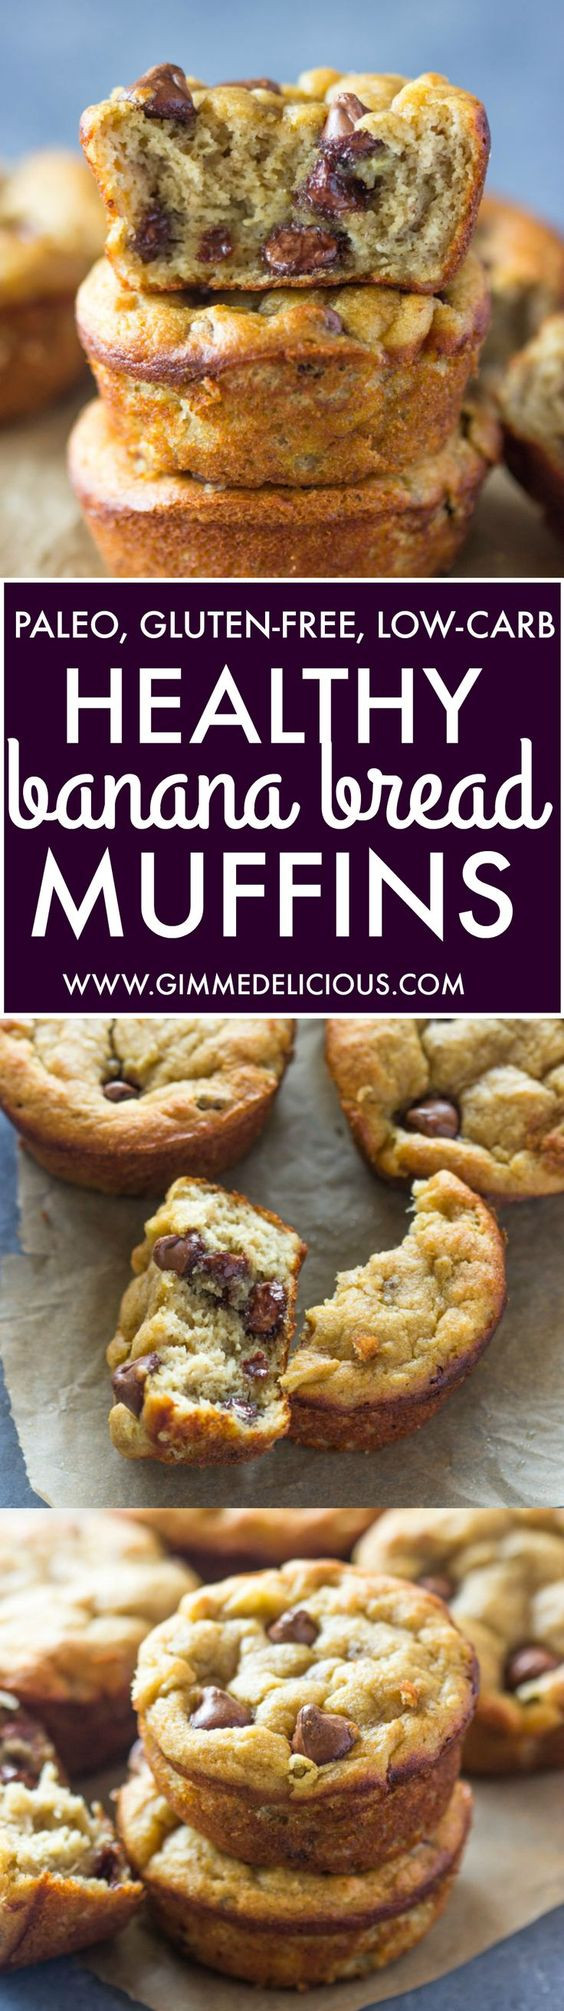 Keto Banana Bread Muffins
 The 7 Best Keto Muffins for a Sweet Keto Snack